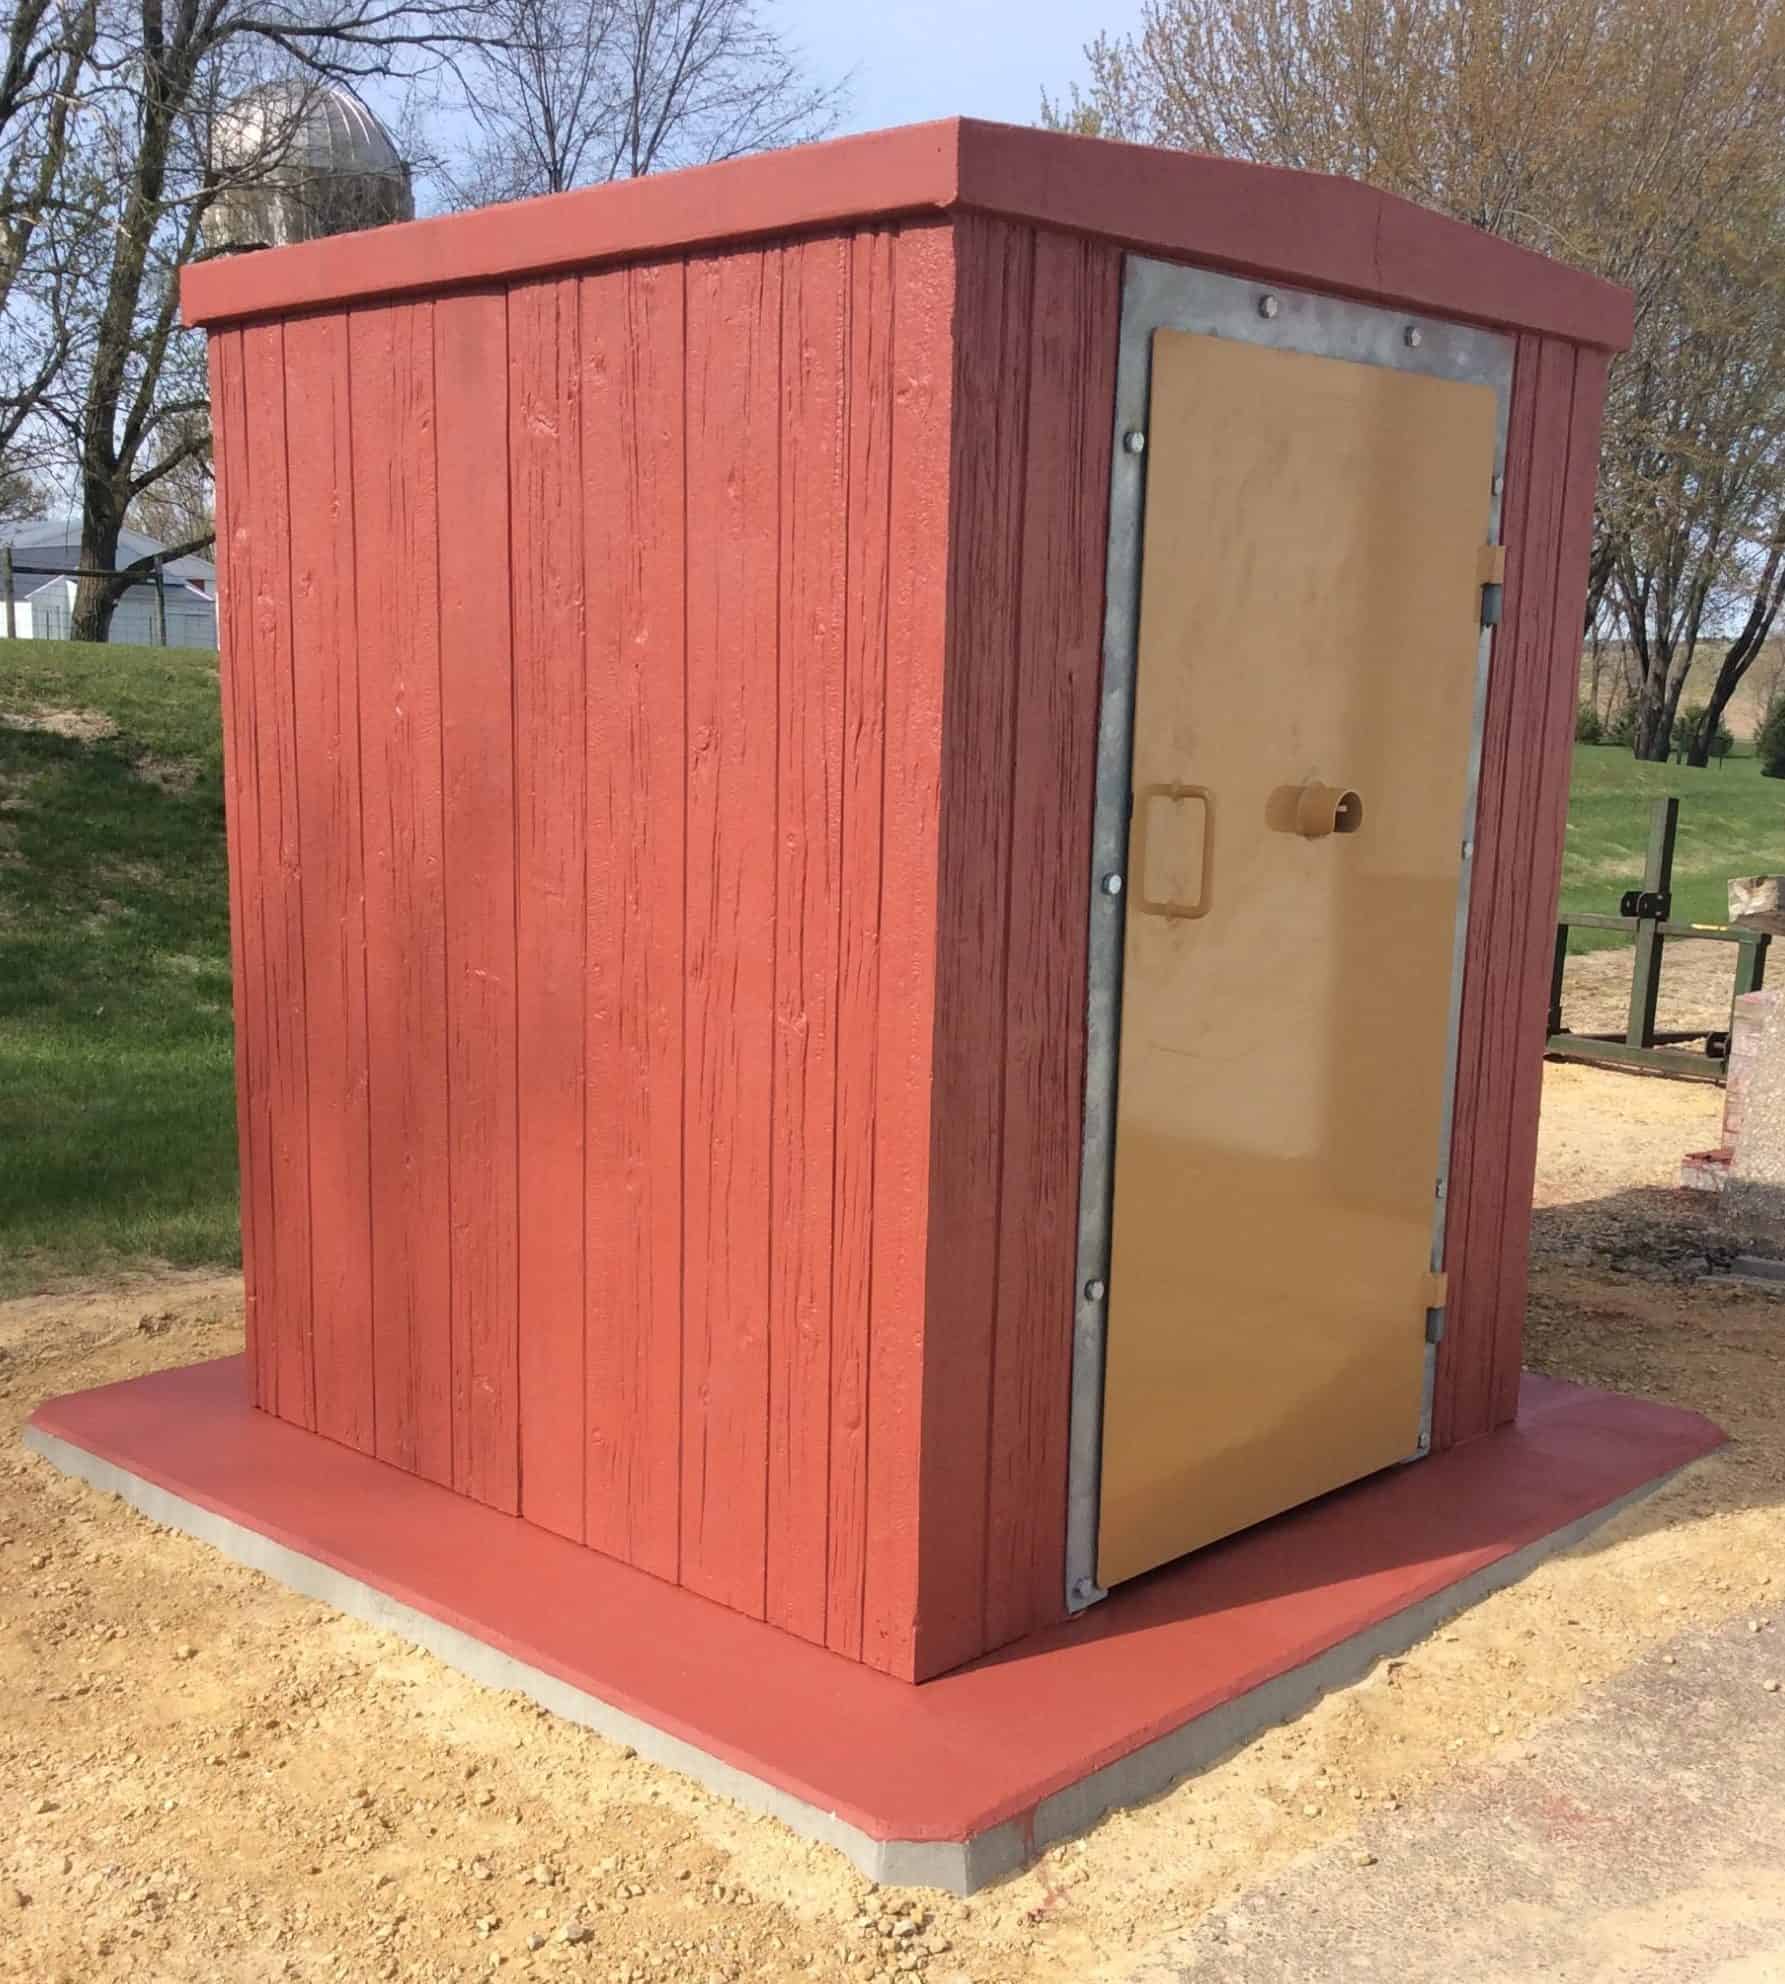 NSSA 8-Person Storm Shelter by Wieser Concrete